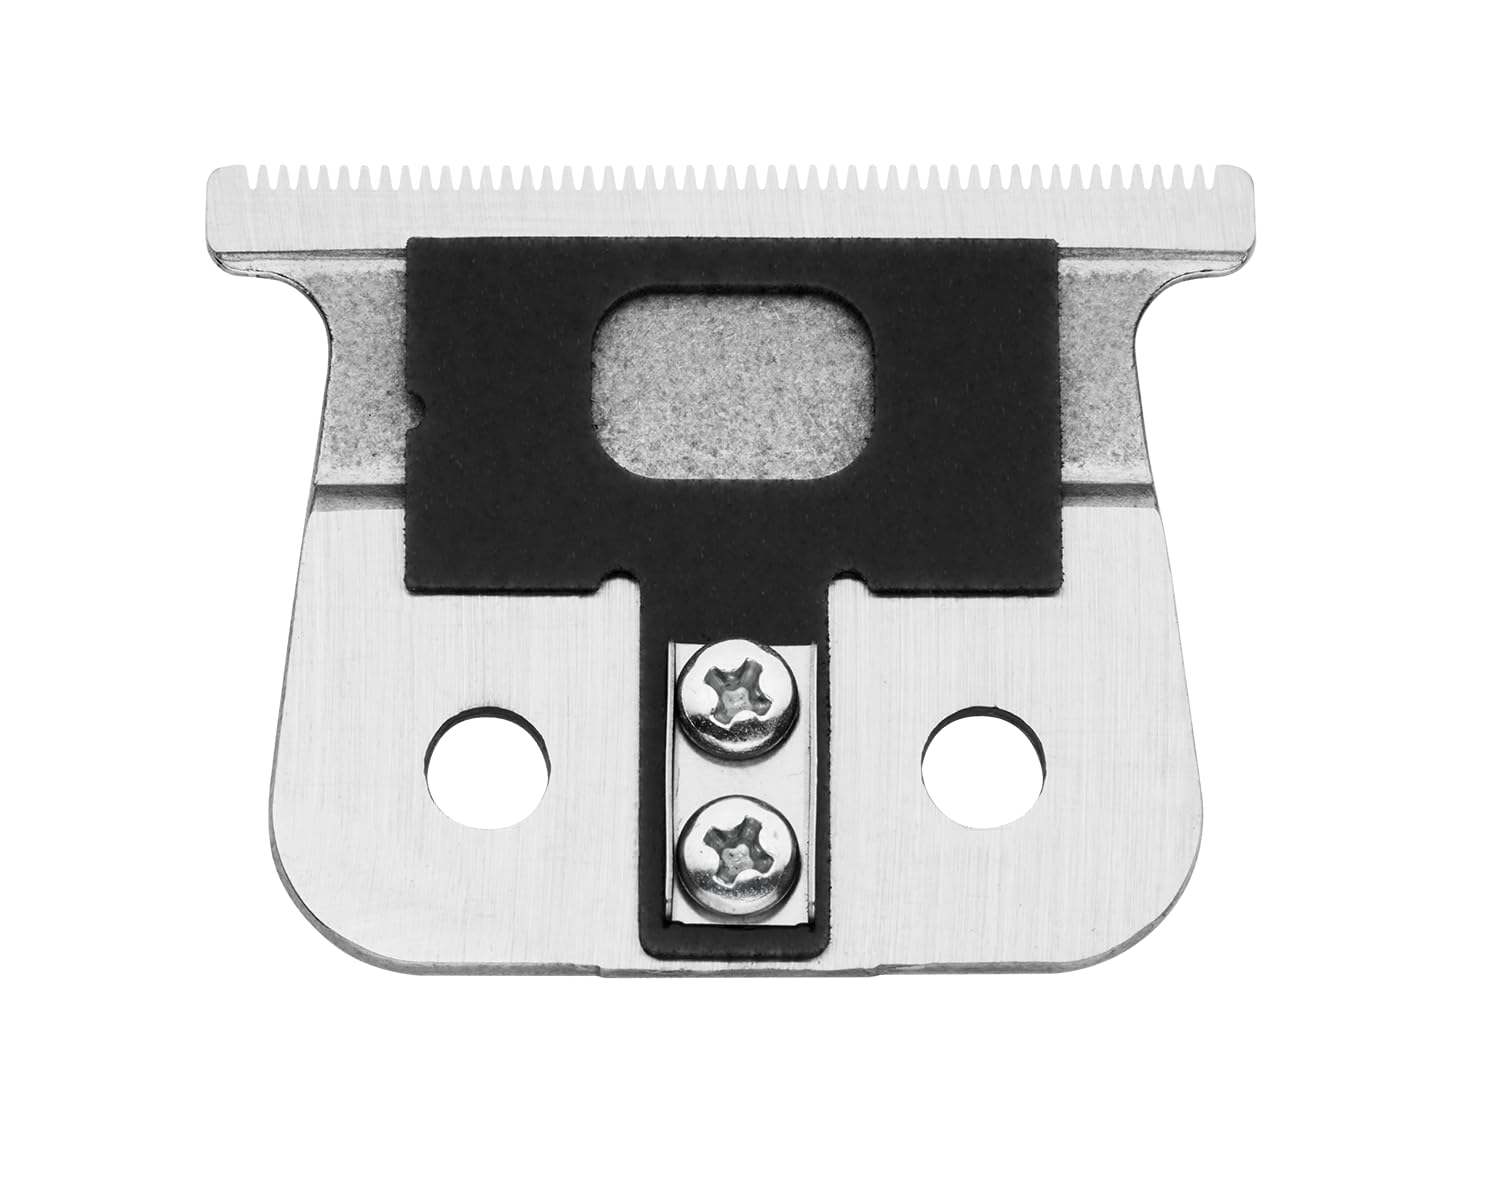 Andis 04521 Replacement T-Blade For T-Outliner Trimmer, Close Cutting Zero Gapped, Replacement Blade For Andis Model GTO, GO, SL, SLS Trimmers, Silver